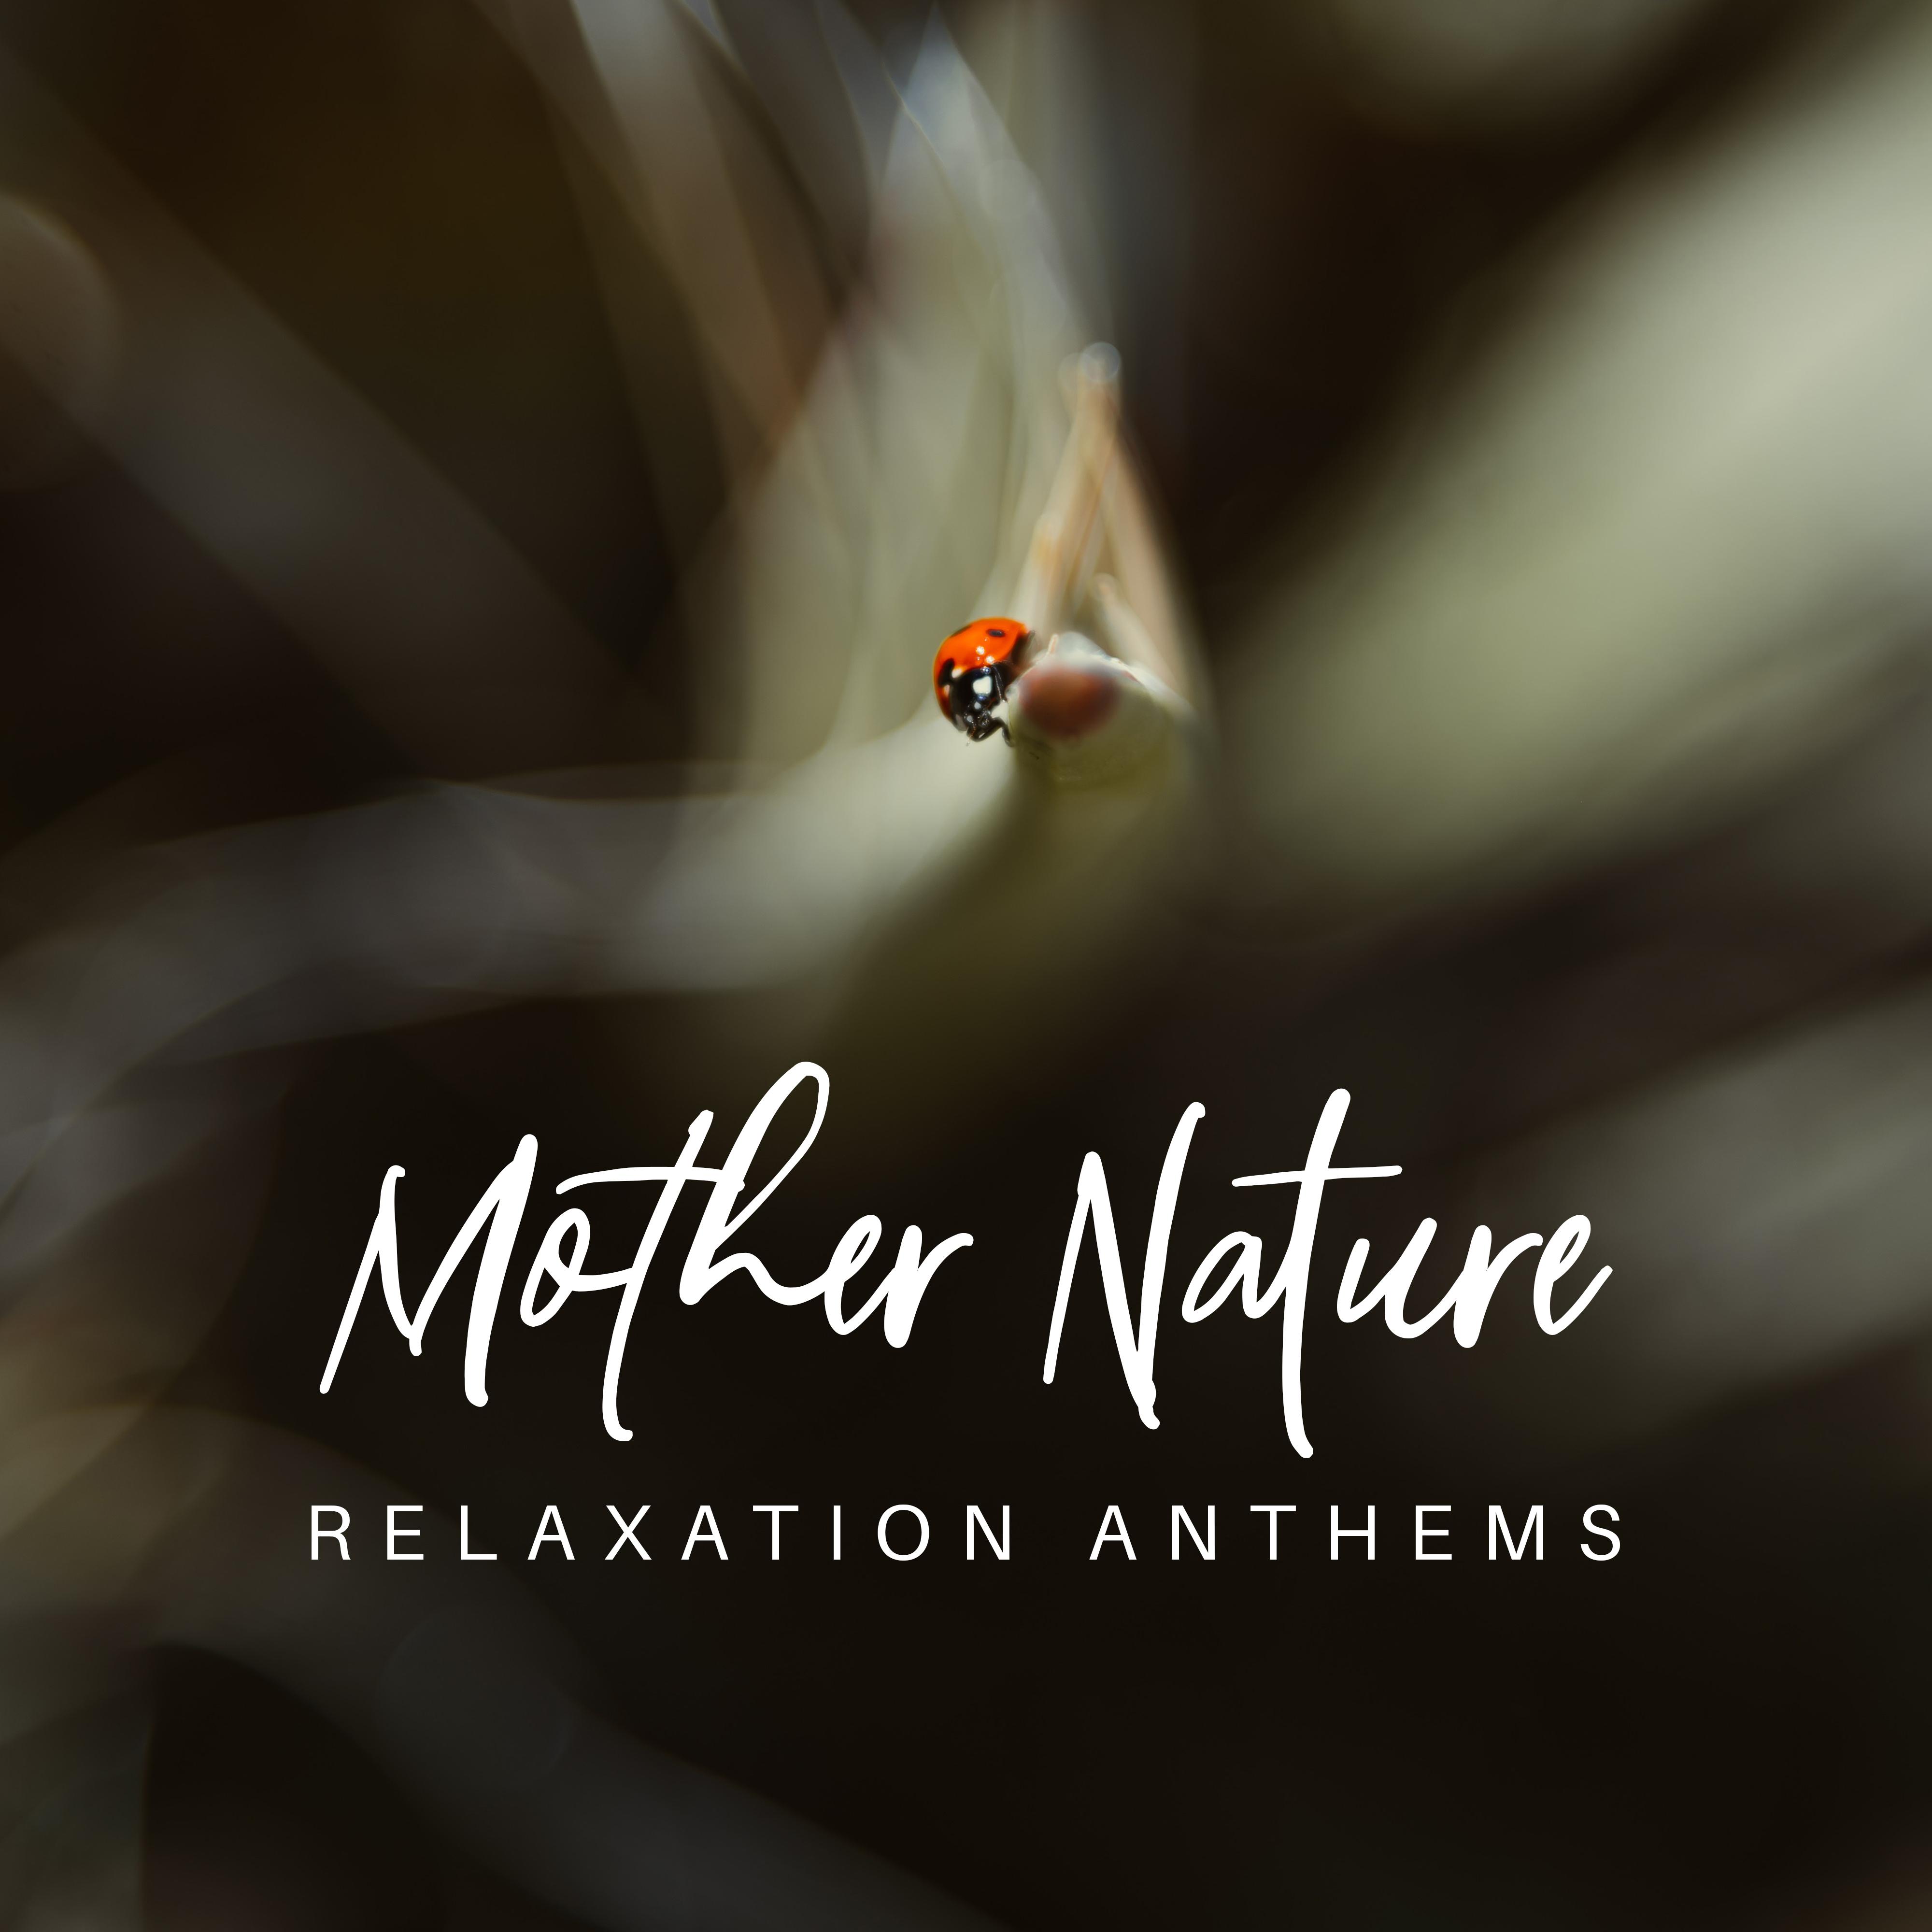 Mother Nature Relaxation Anthems: 2019 New Age Music for Total Relax, Calming Down Sounds, Rest After Long Day